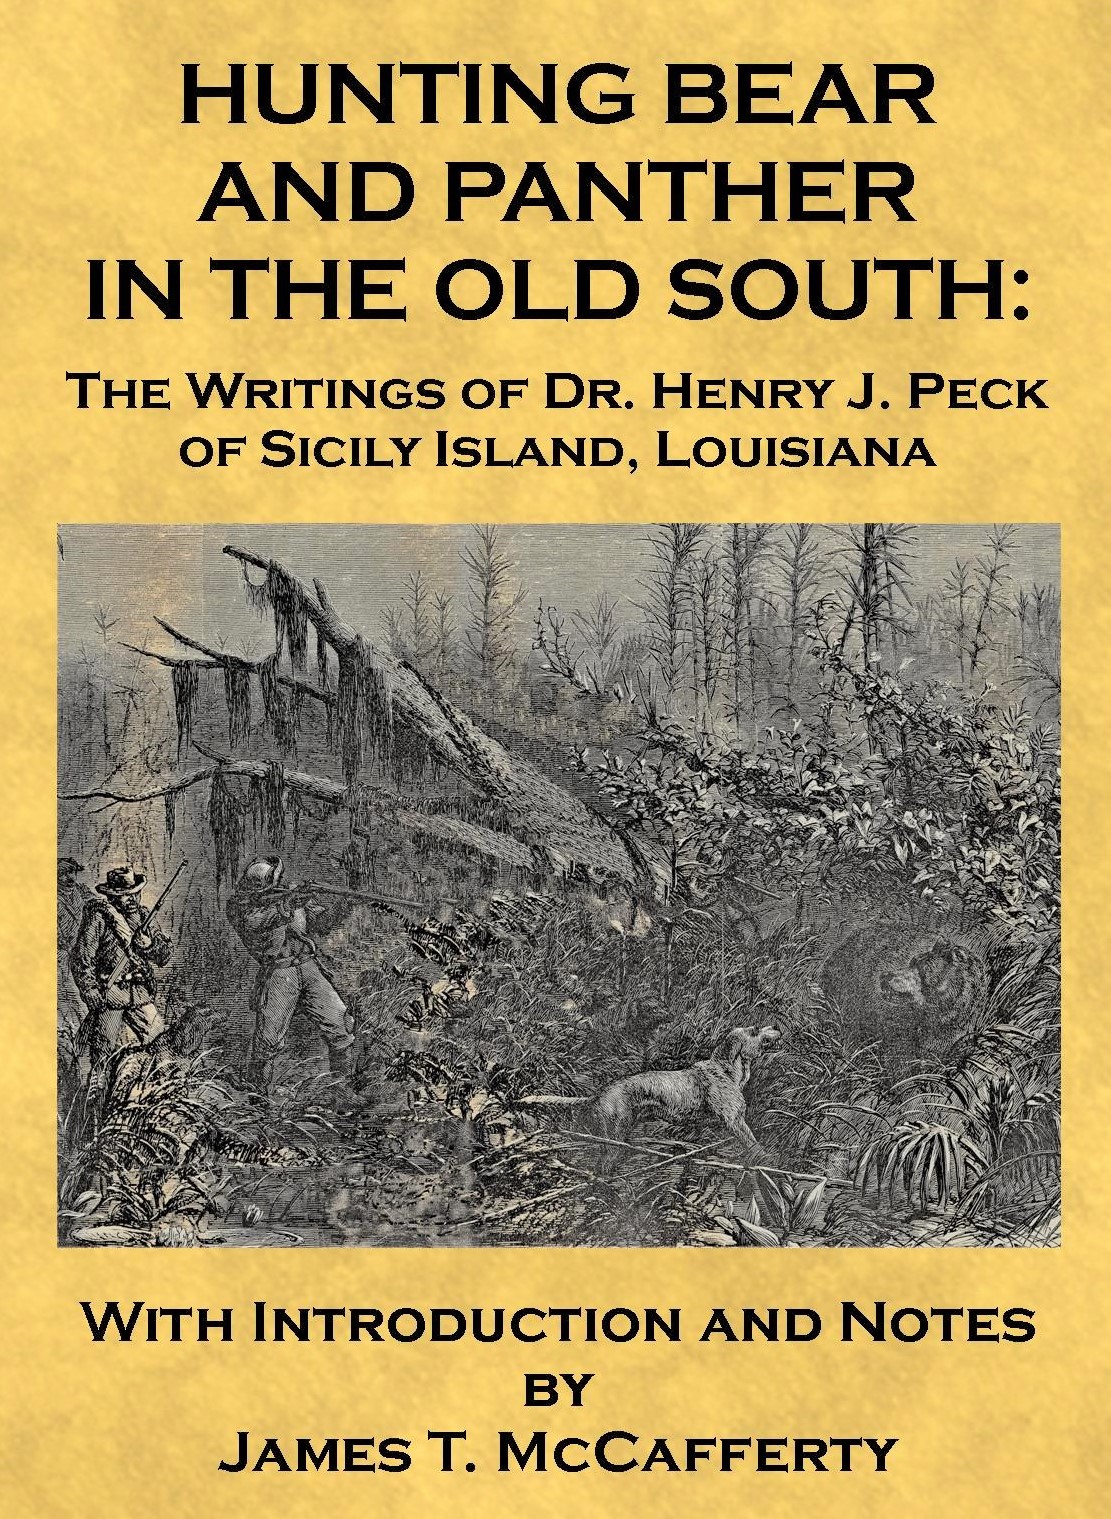 Hunting Bear and Panther in the Old South